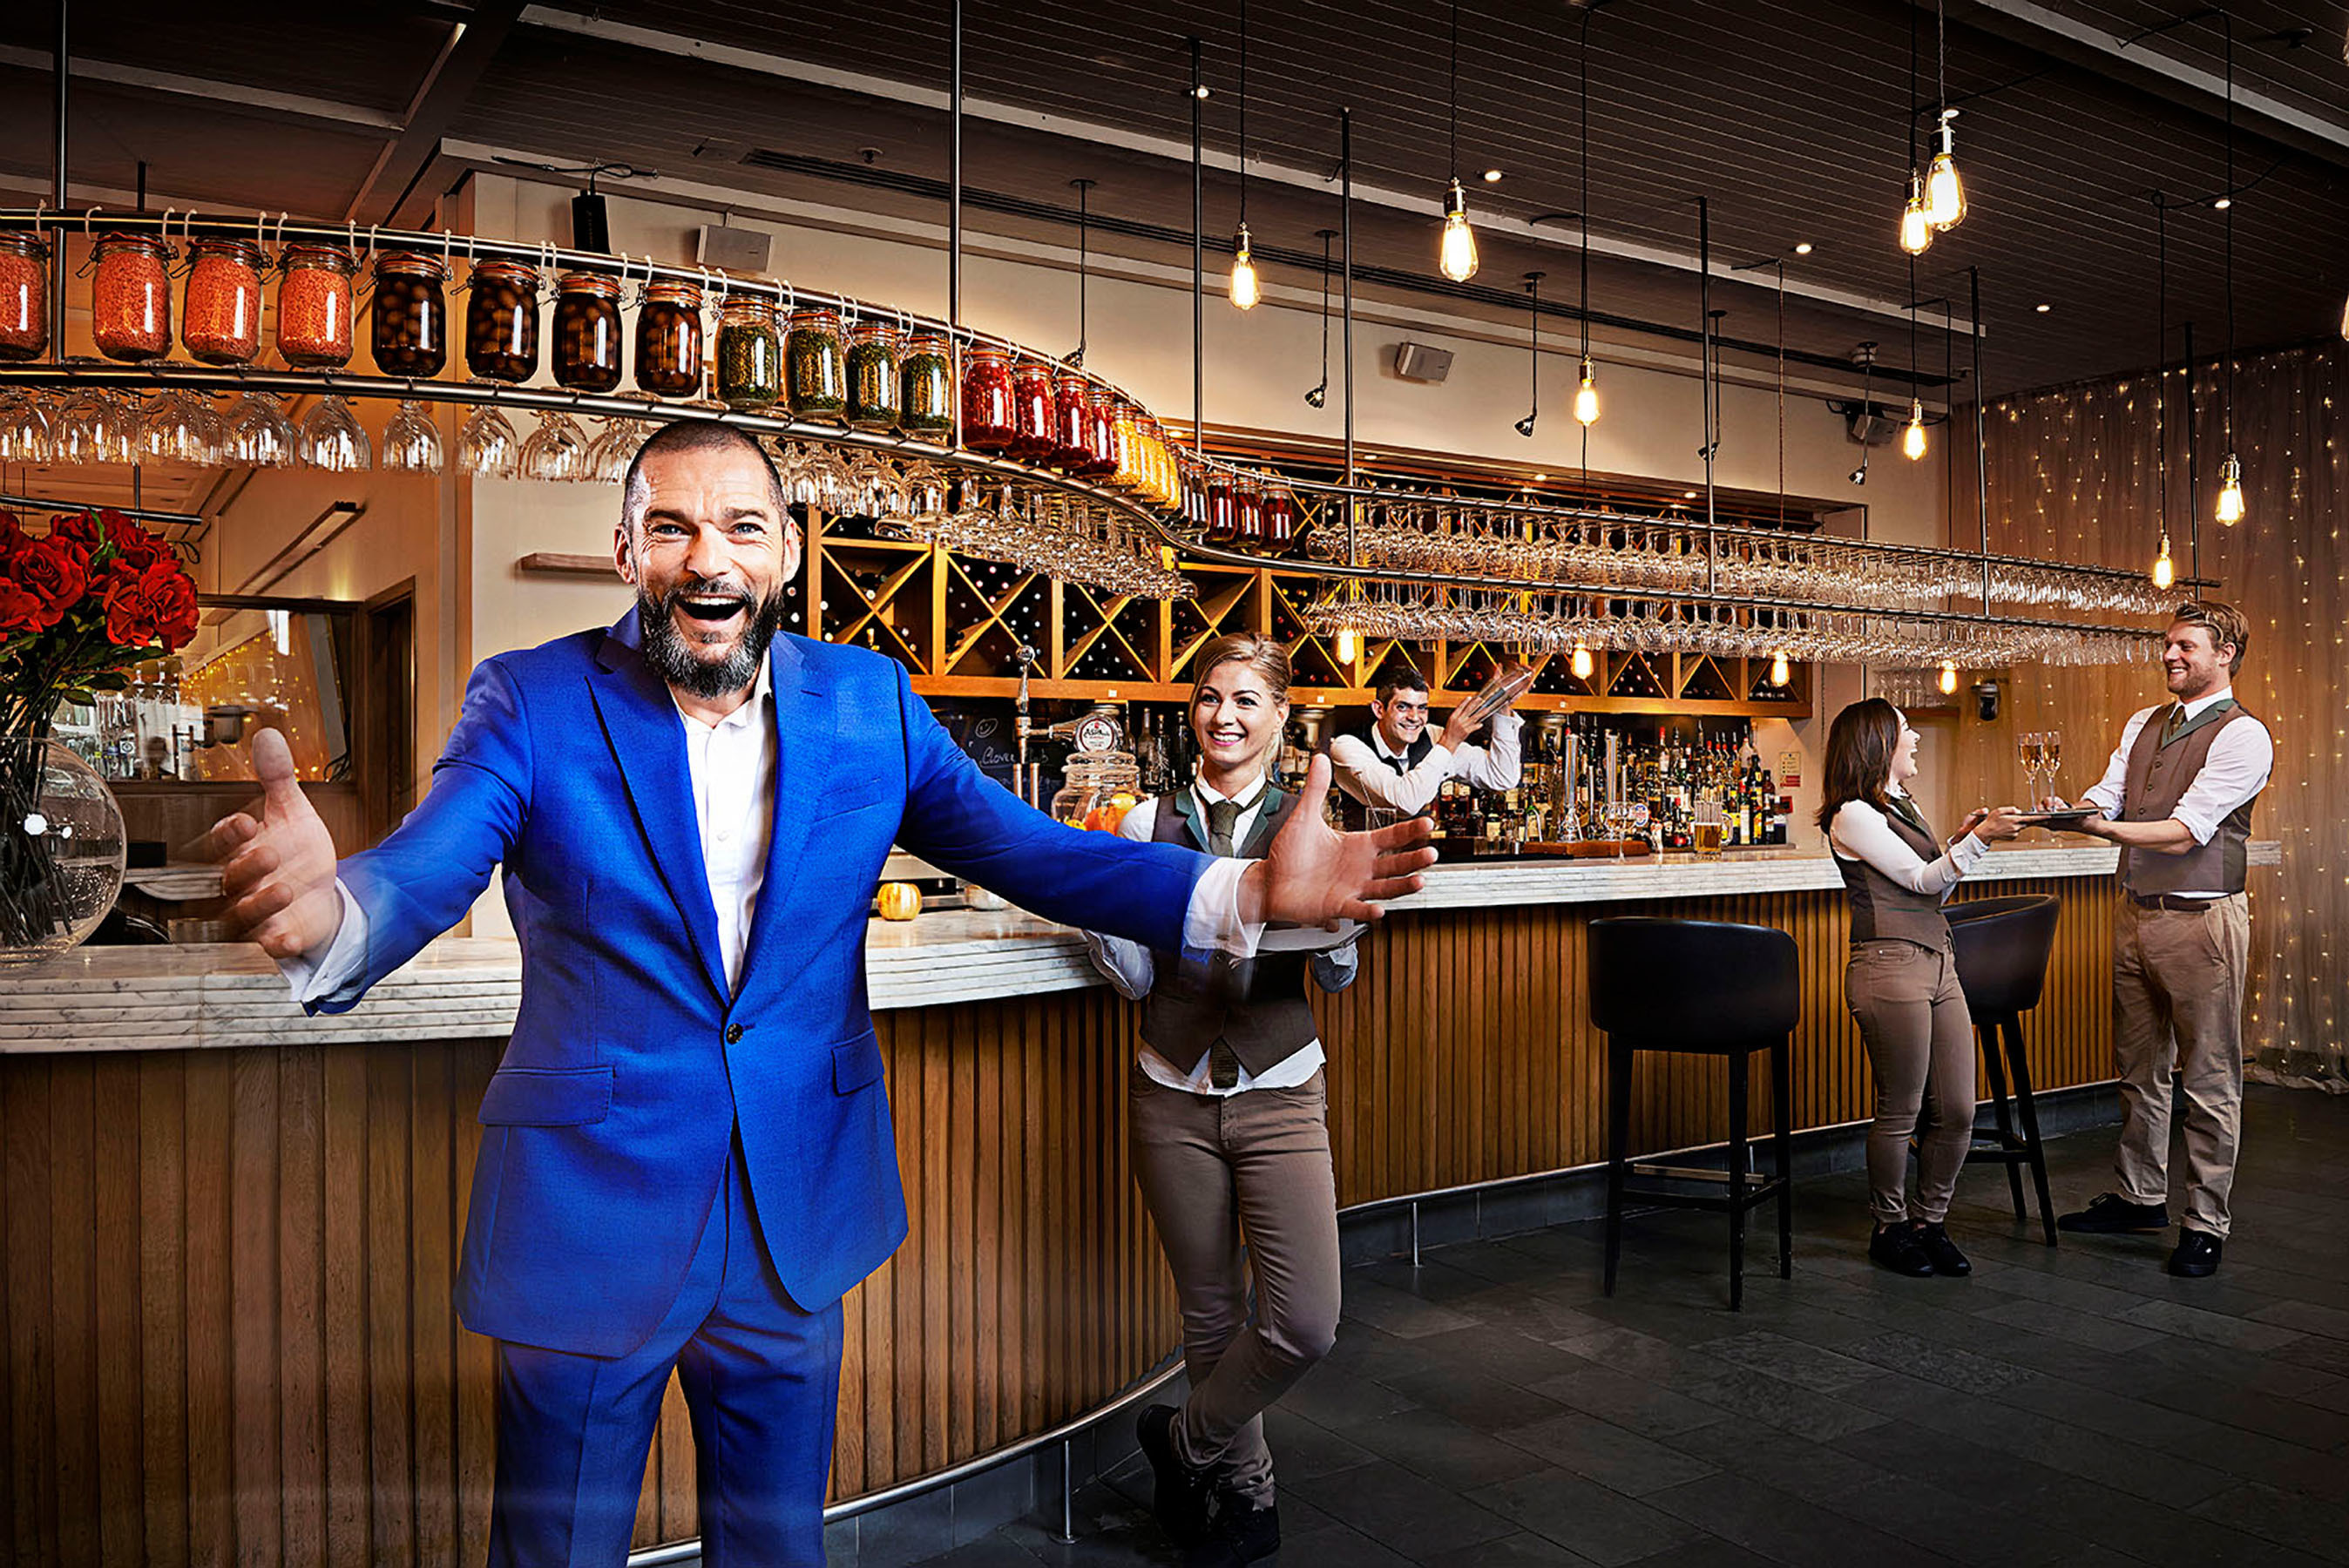 Fred and the Staff at the First Dates restaurant (Channel4)